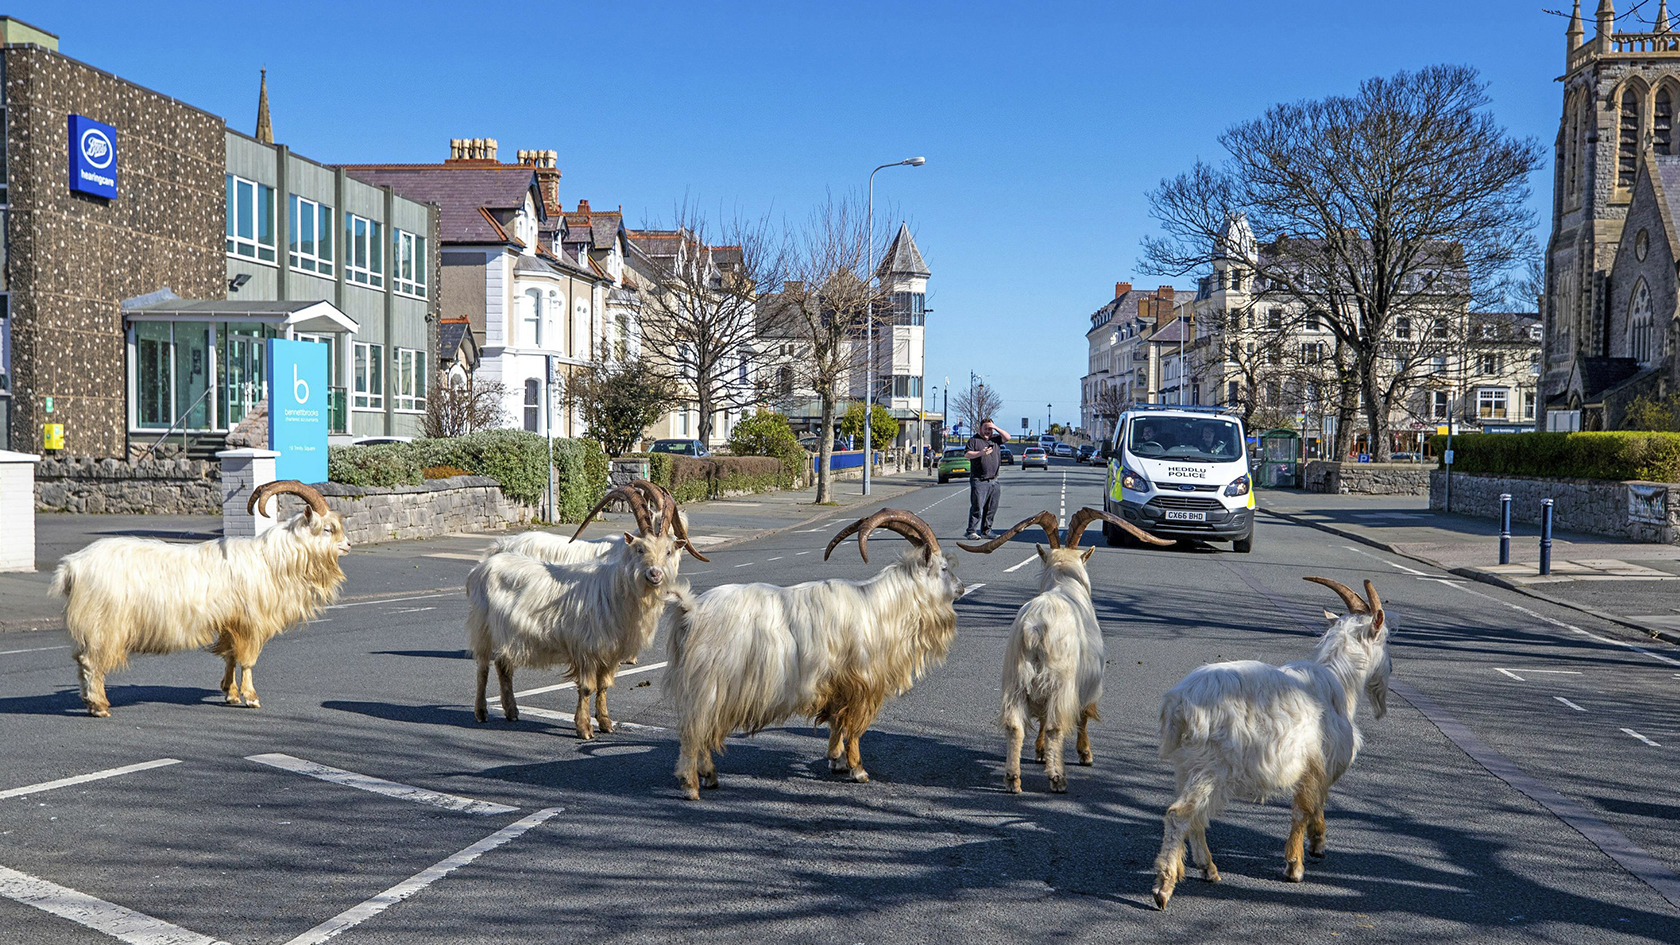 Watch: Wild Mountain Goats Take Over A Town Under Lockdown In The UK